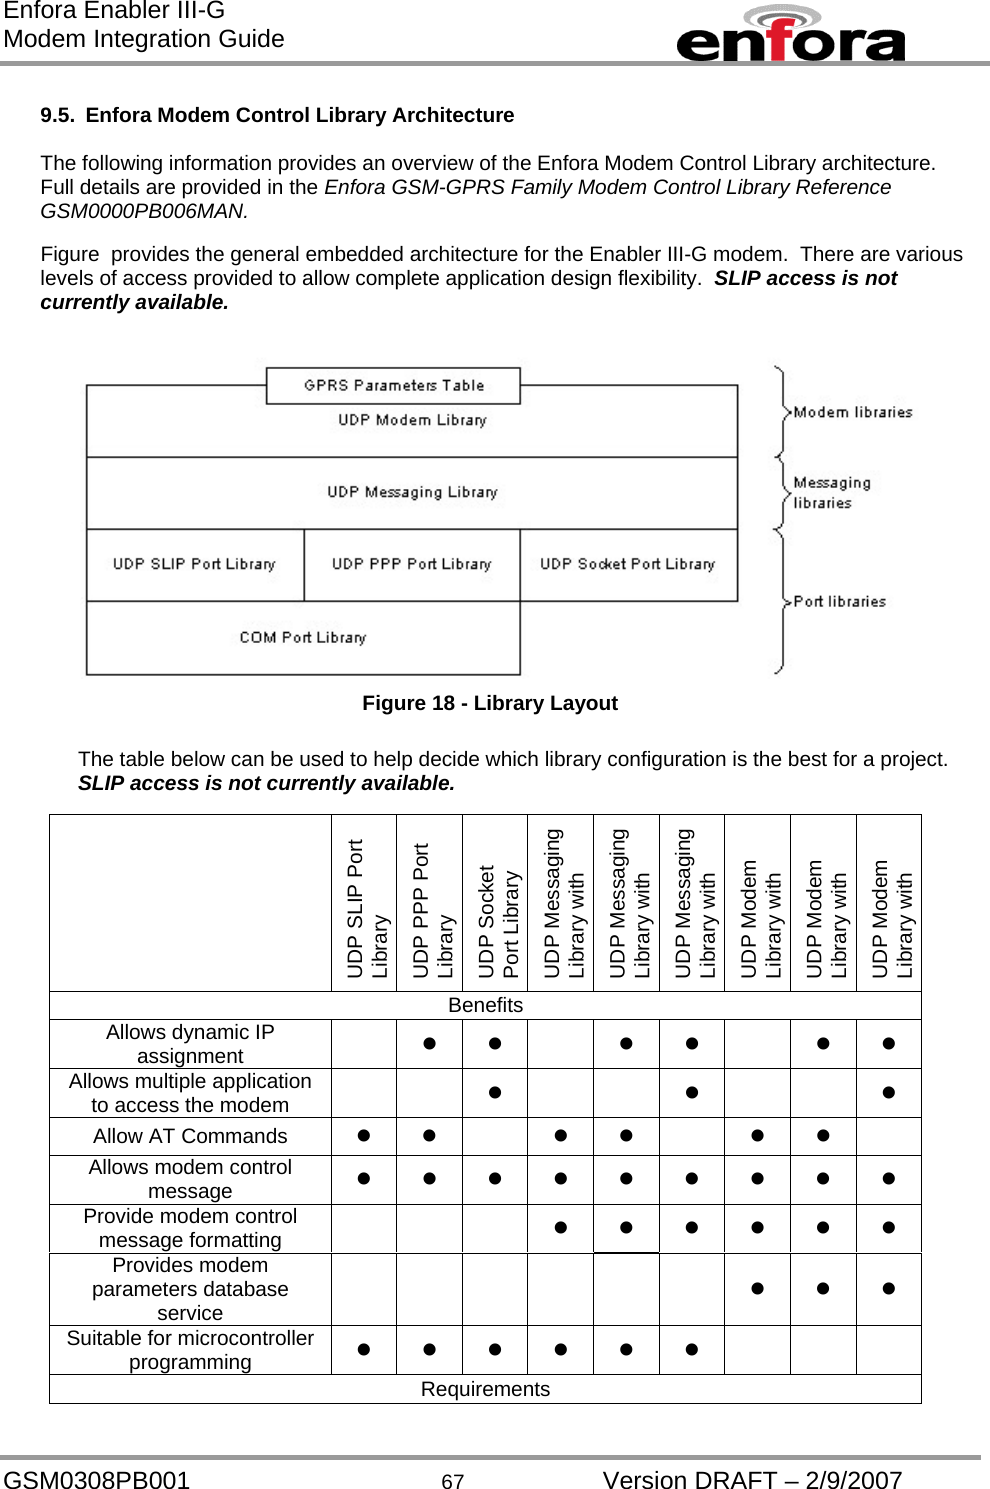 Enfora Enabler III-G Modem Integration Guide  9.5.  Enfora Modem Control Library Architecture  The following information provides an overview of the Enfora Modem Control Library architecture.  Full details are provided in the Enfora GSM-GPRS Family Modem Control Library Reference GSM0000PB006MAN.  Figure  provides the general embedded architecture for the Enabler III-G modem.  There are various levels of access provided to allow complete application design flexibility.  SLIP access is not currently available.   Figure 18 - Library Layout  The table below can be used to help decide which library configuration is the best for a project.  SLIP access is not currently available.   UDP SLIP Port Library UDP PPP Port Library UDP Socket Port Library UDP Messaging Library with SUDP Messaging Library with UDP Messaging Library with SUDP Modem Library with SUDP Modem Library with UDP Modem Library with SBenefits Allows dynamic IP assignment           Allows multiple application to access the modem           Allow AT Commands           Allows modem control message           Provide modem control message formatting           Provides modem parameters database service           Suitable for microcontroller programming           Requirements GSM0308PB001  67  Version DRAFT – 2/9/2007 